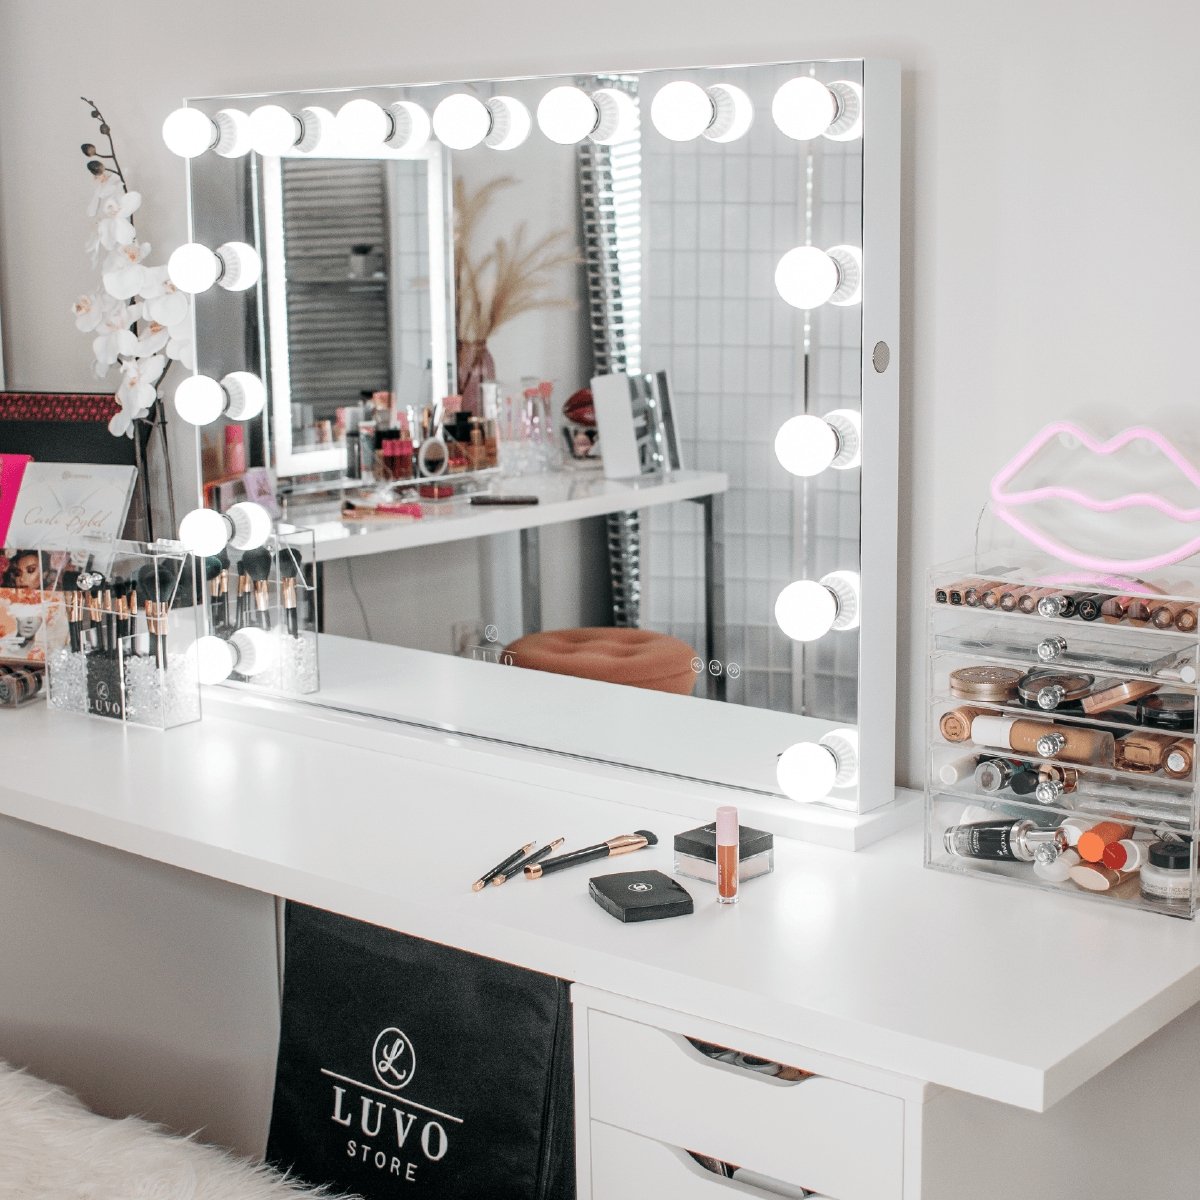 How To Create Your Own Makeup Station | Luvo Store